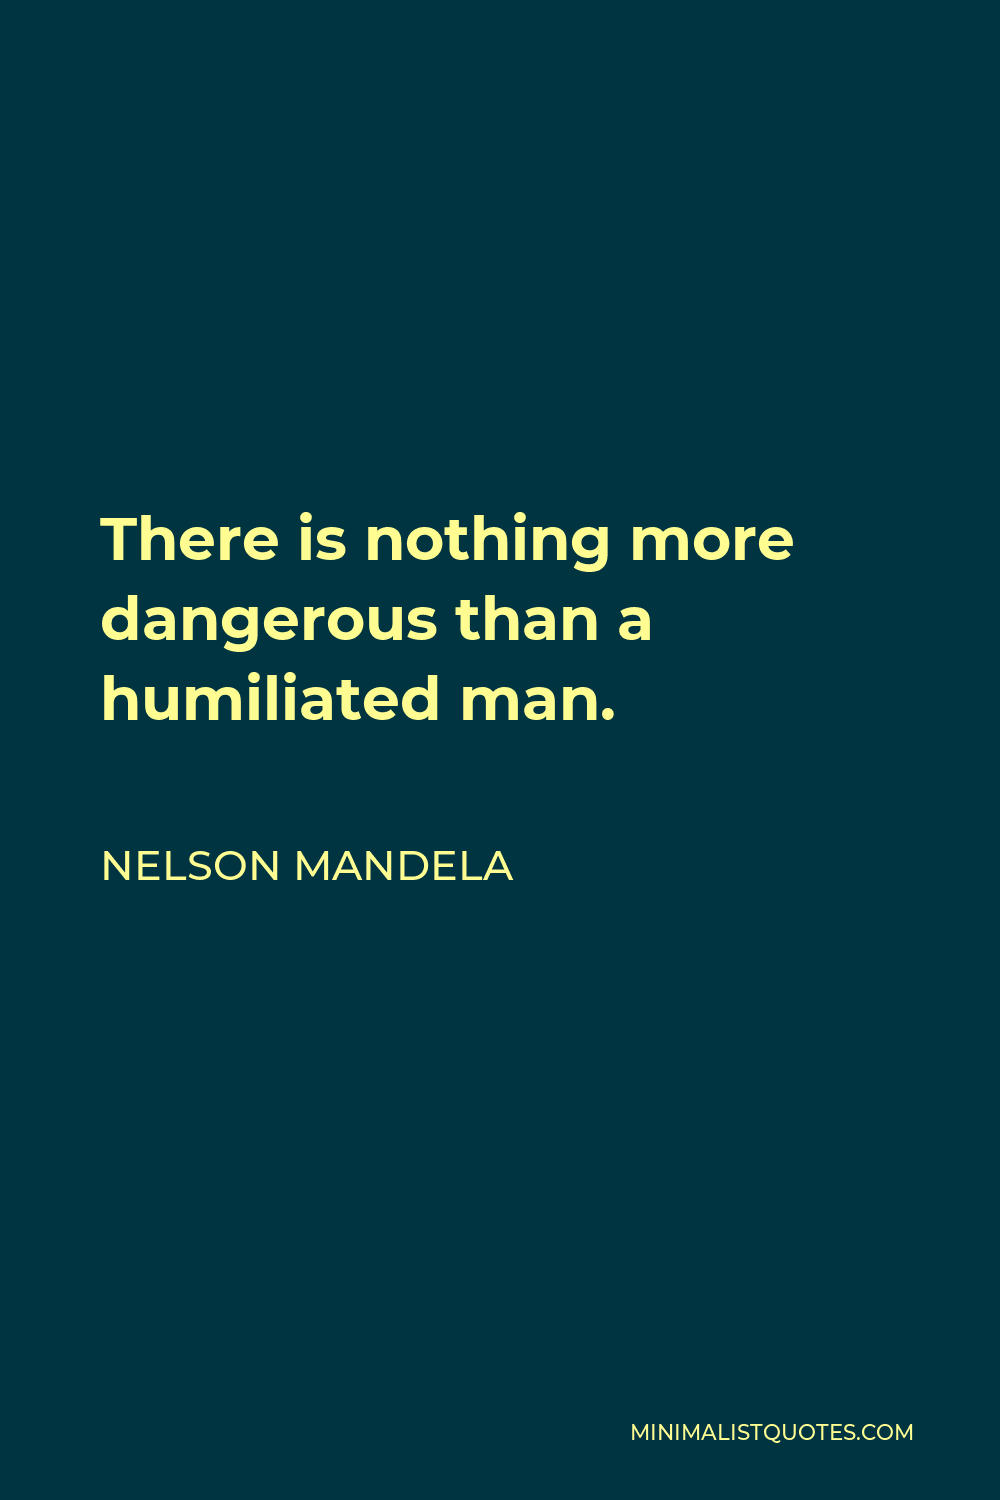 Nelson Mandela Quote - There is nothing more dangerous than a humiliated man.